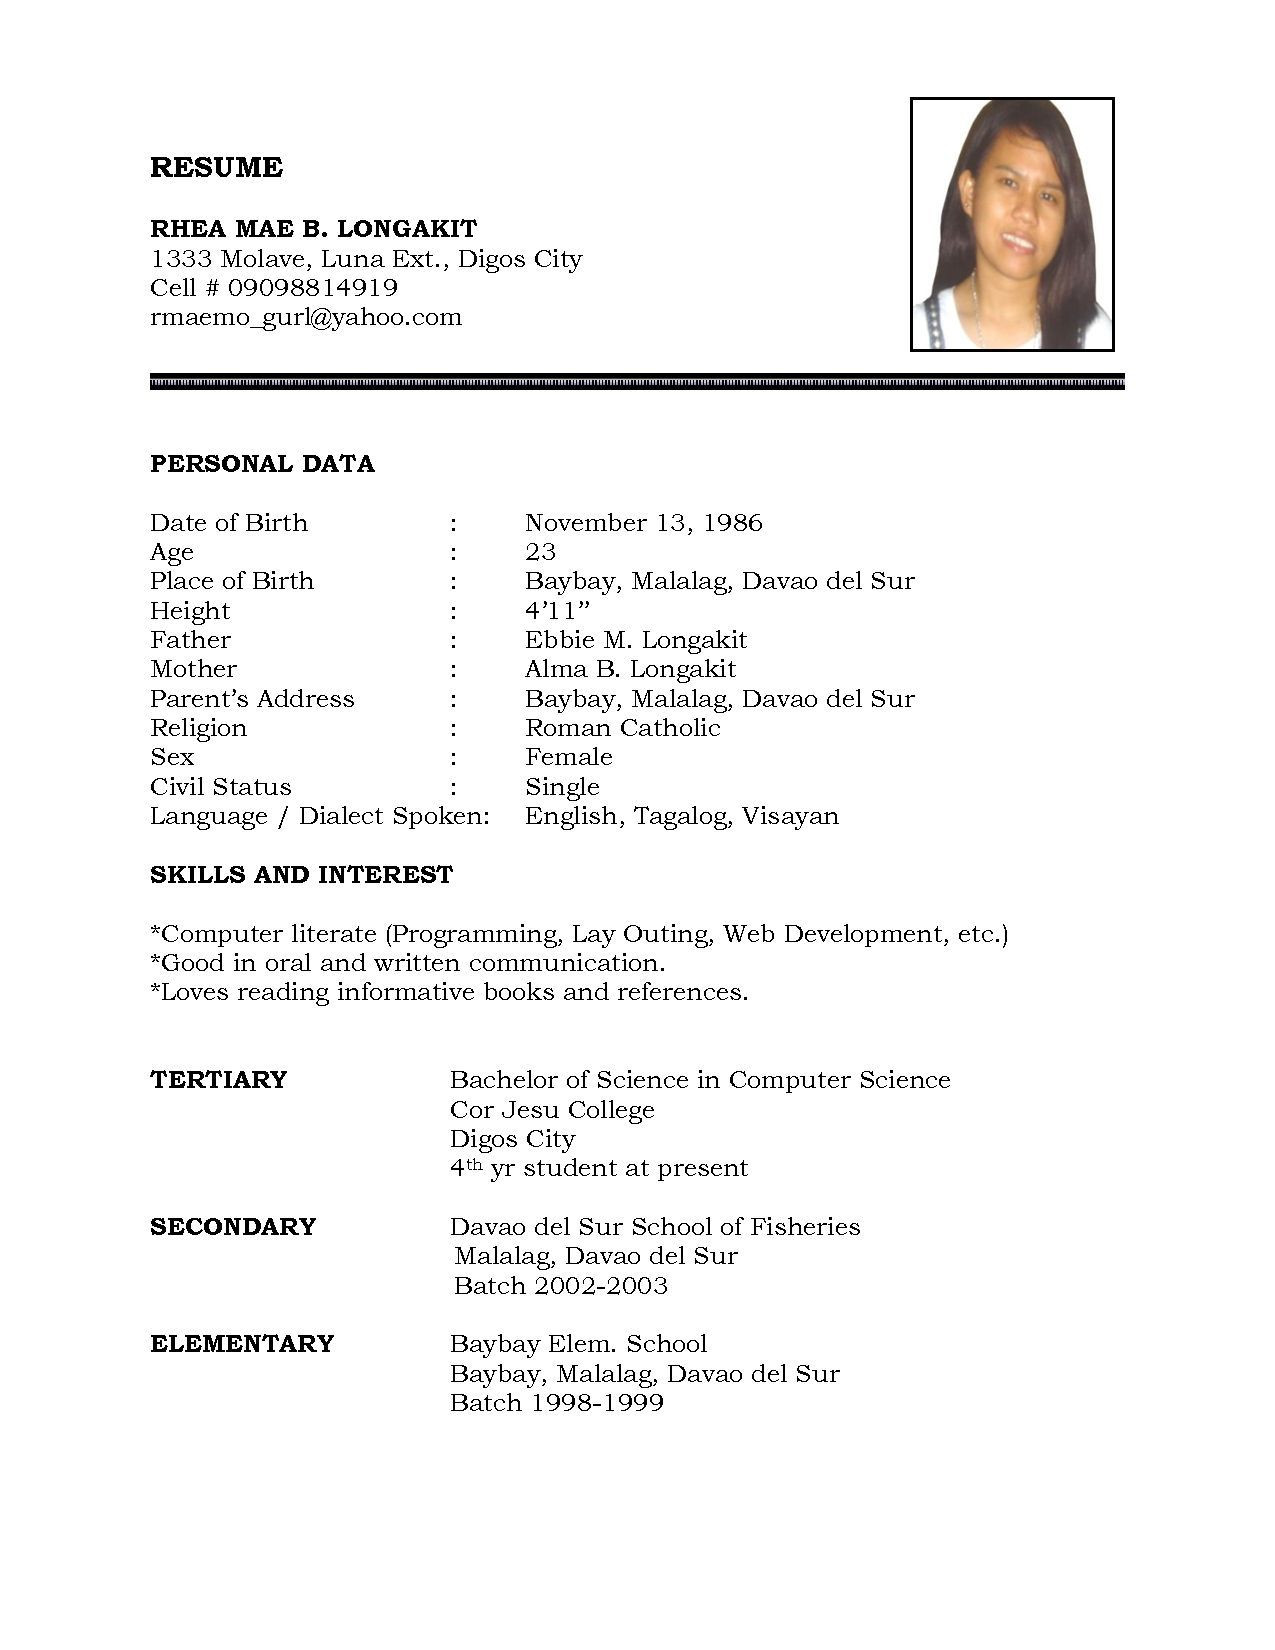 Sample Of Simple Resume for Job Application Pin by Laurie Koitzsch Quick On Carissa B. Hernandez Job Resume …